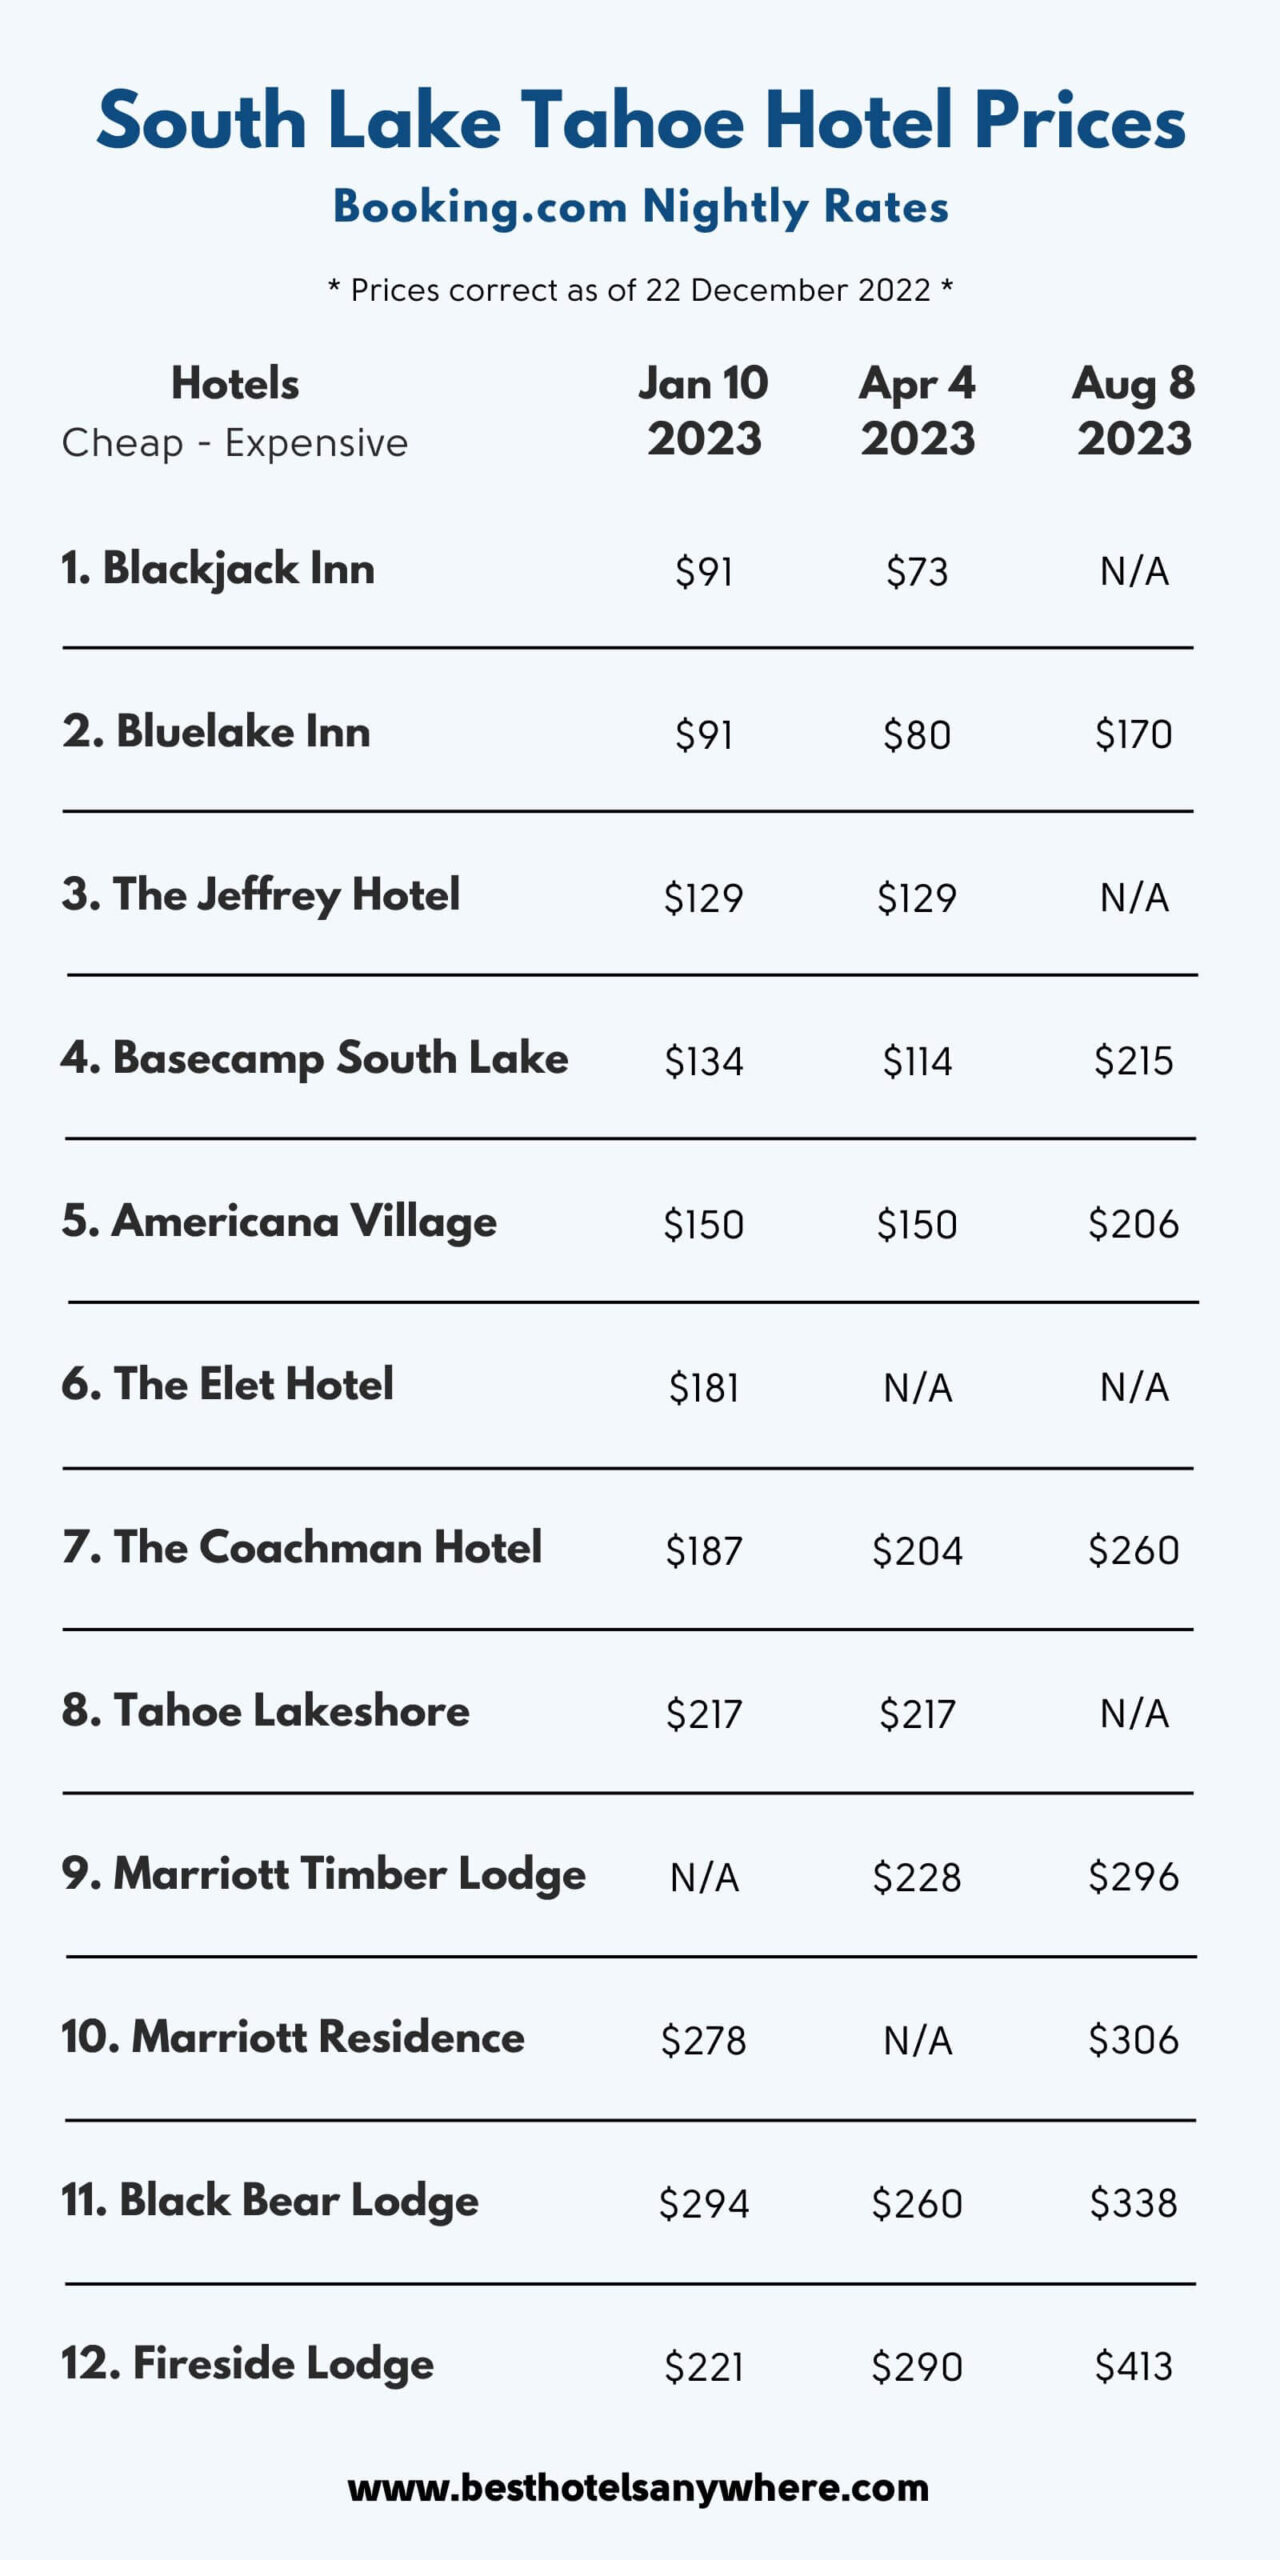 Infographic by Best Hotels Anywhere showing South Lake Tahoe hotel prices for 3 future dates